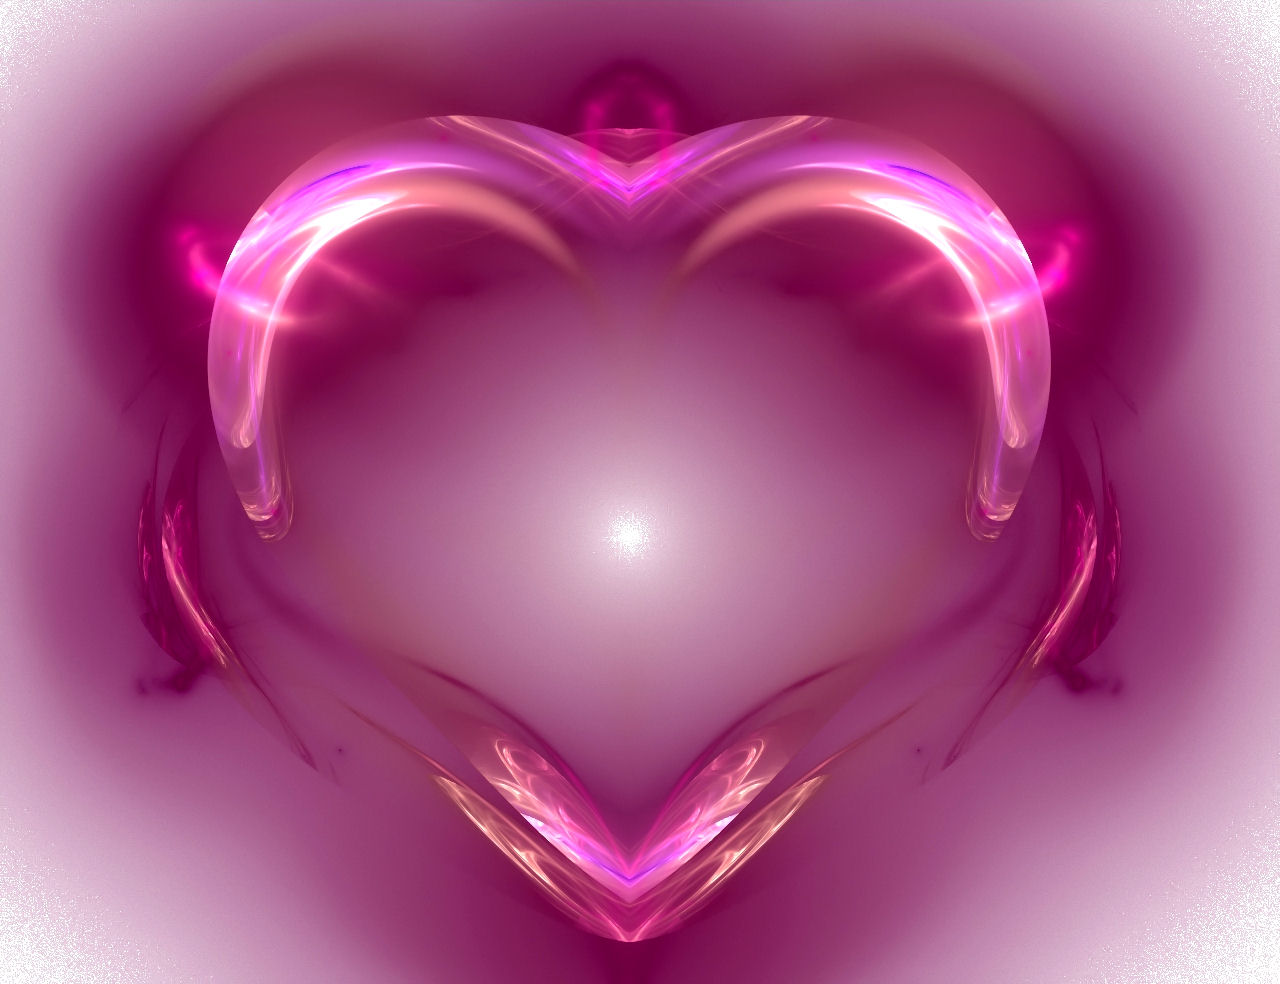 Heart Wallpaper Or Picture Of Pink Abstract